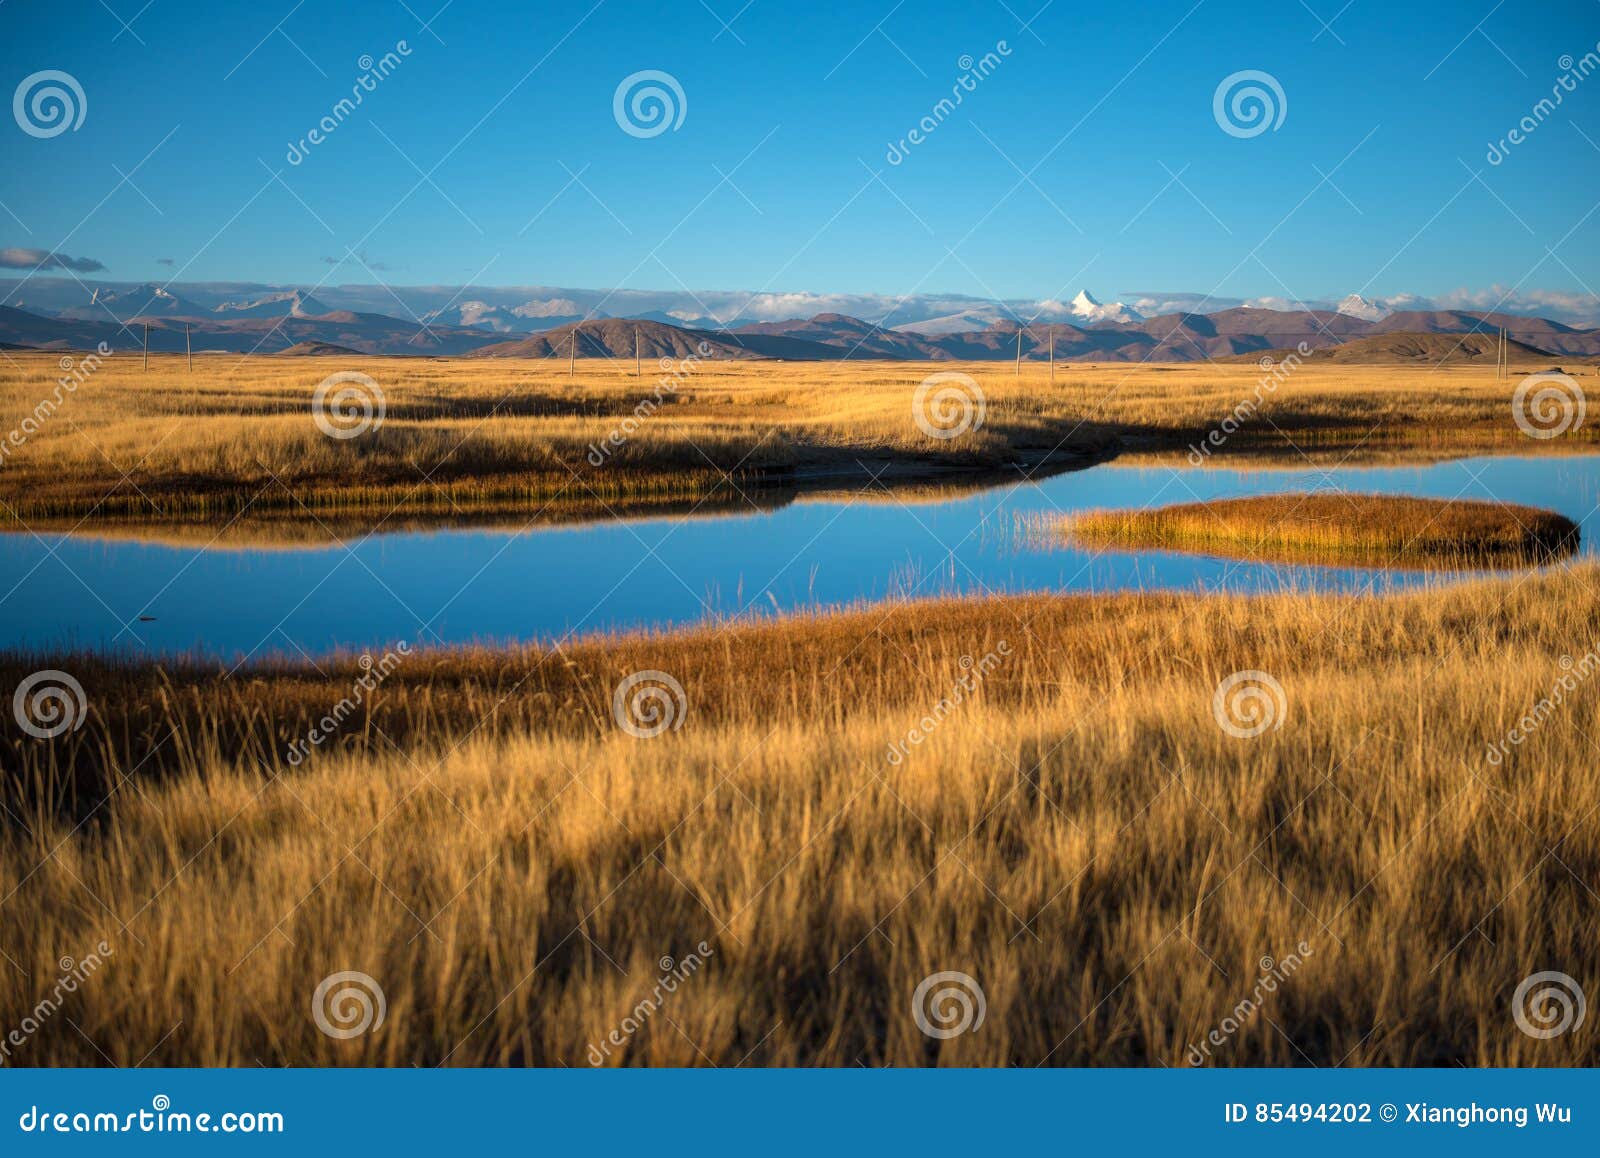 The Beautiful Scenery: Travelling in Tibet Stock Photo - Image of ...